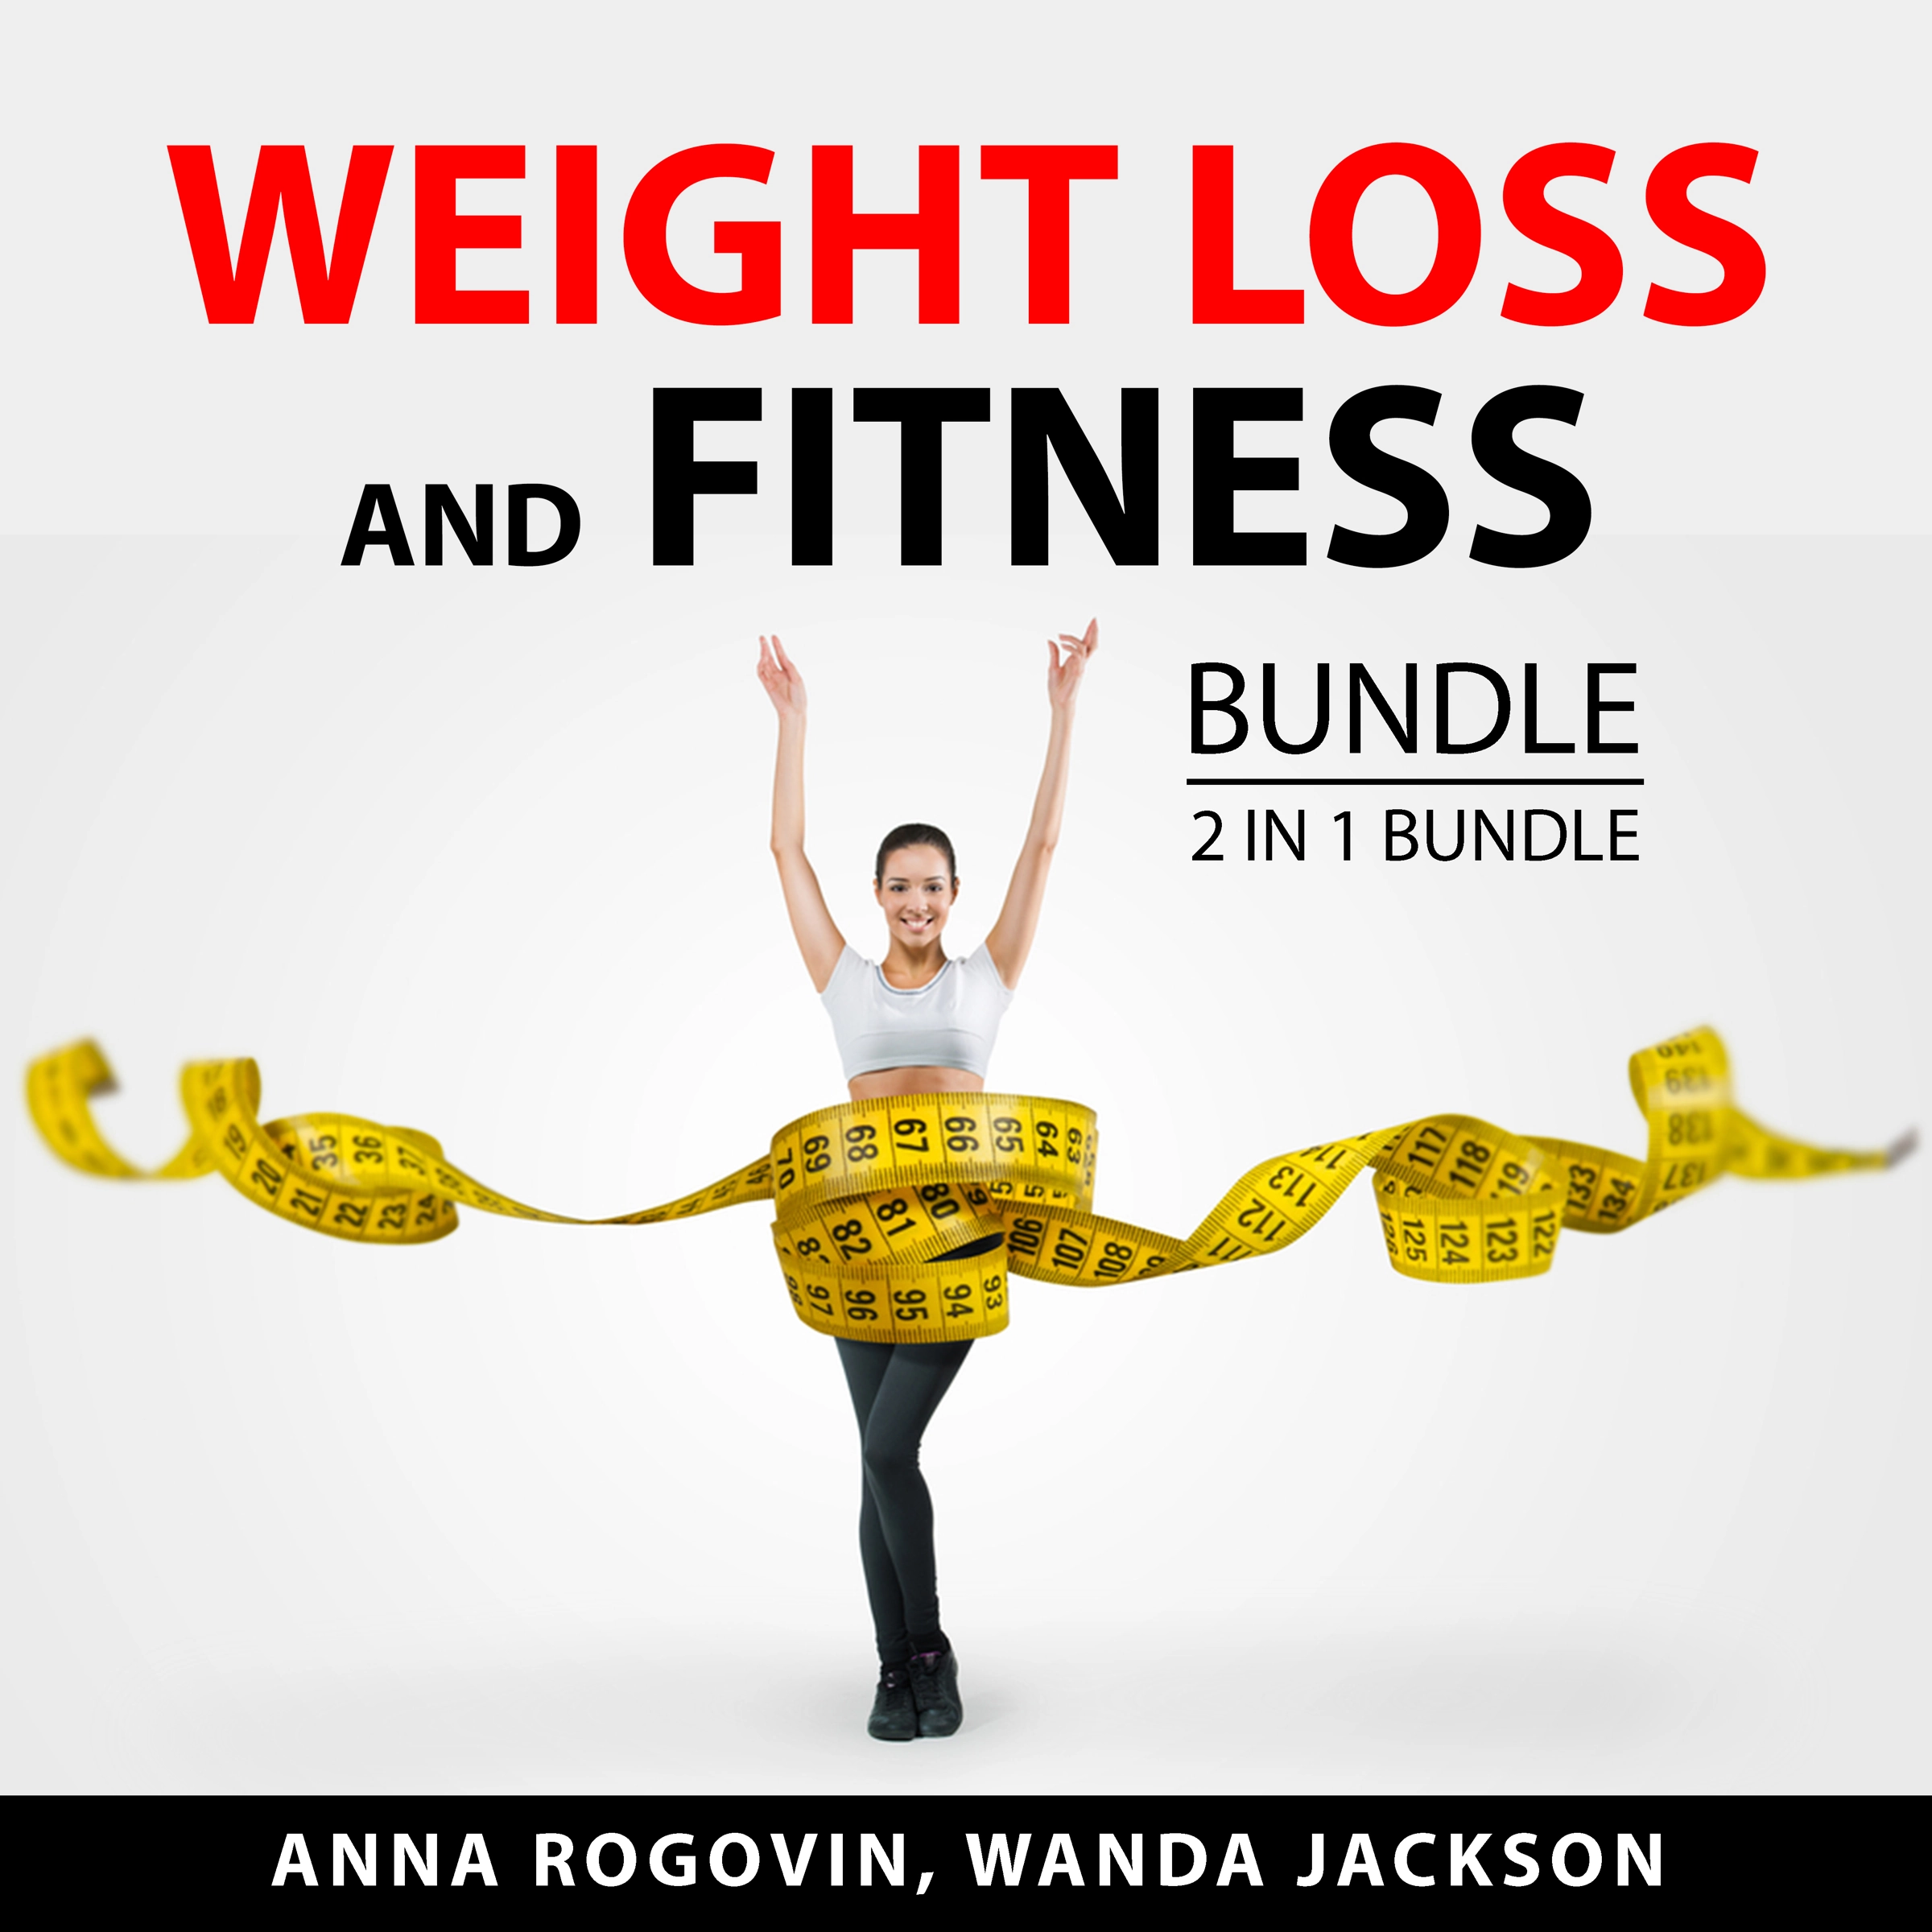 Weight Loss and Fitness Bundle, 2 in 1 Bundle Audiobook by Wanda Jackson